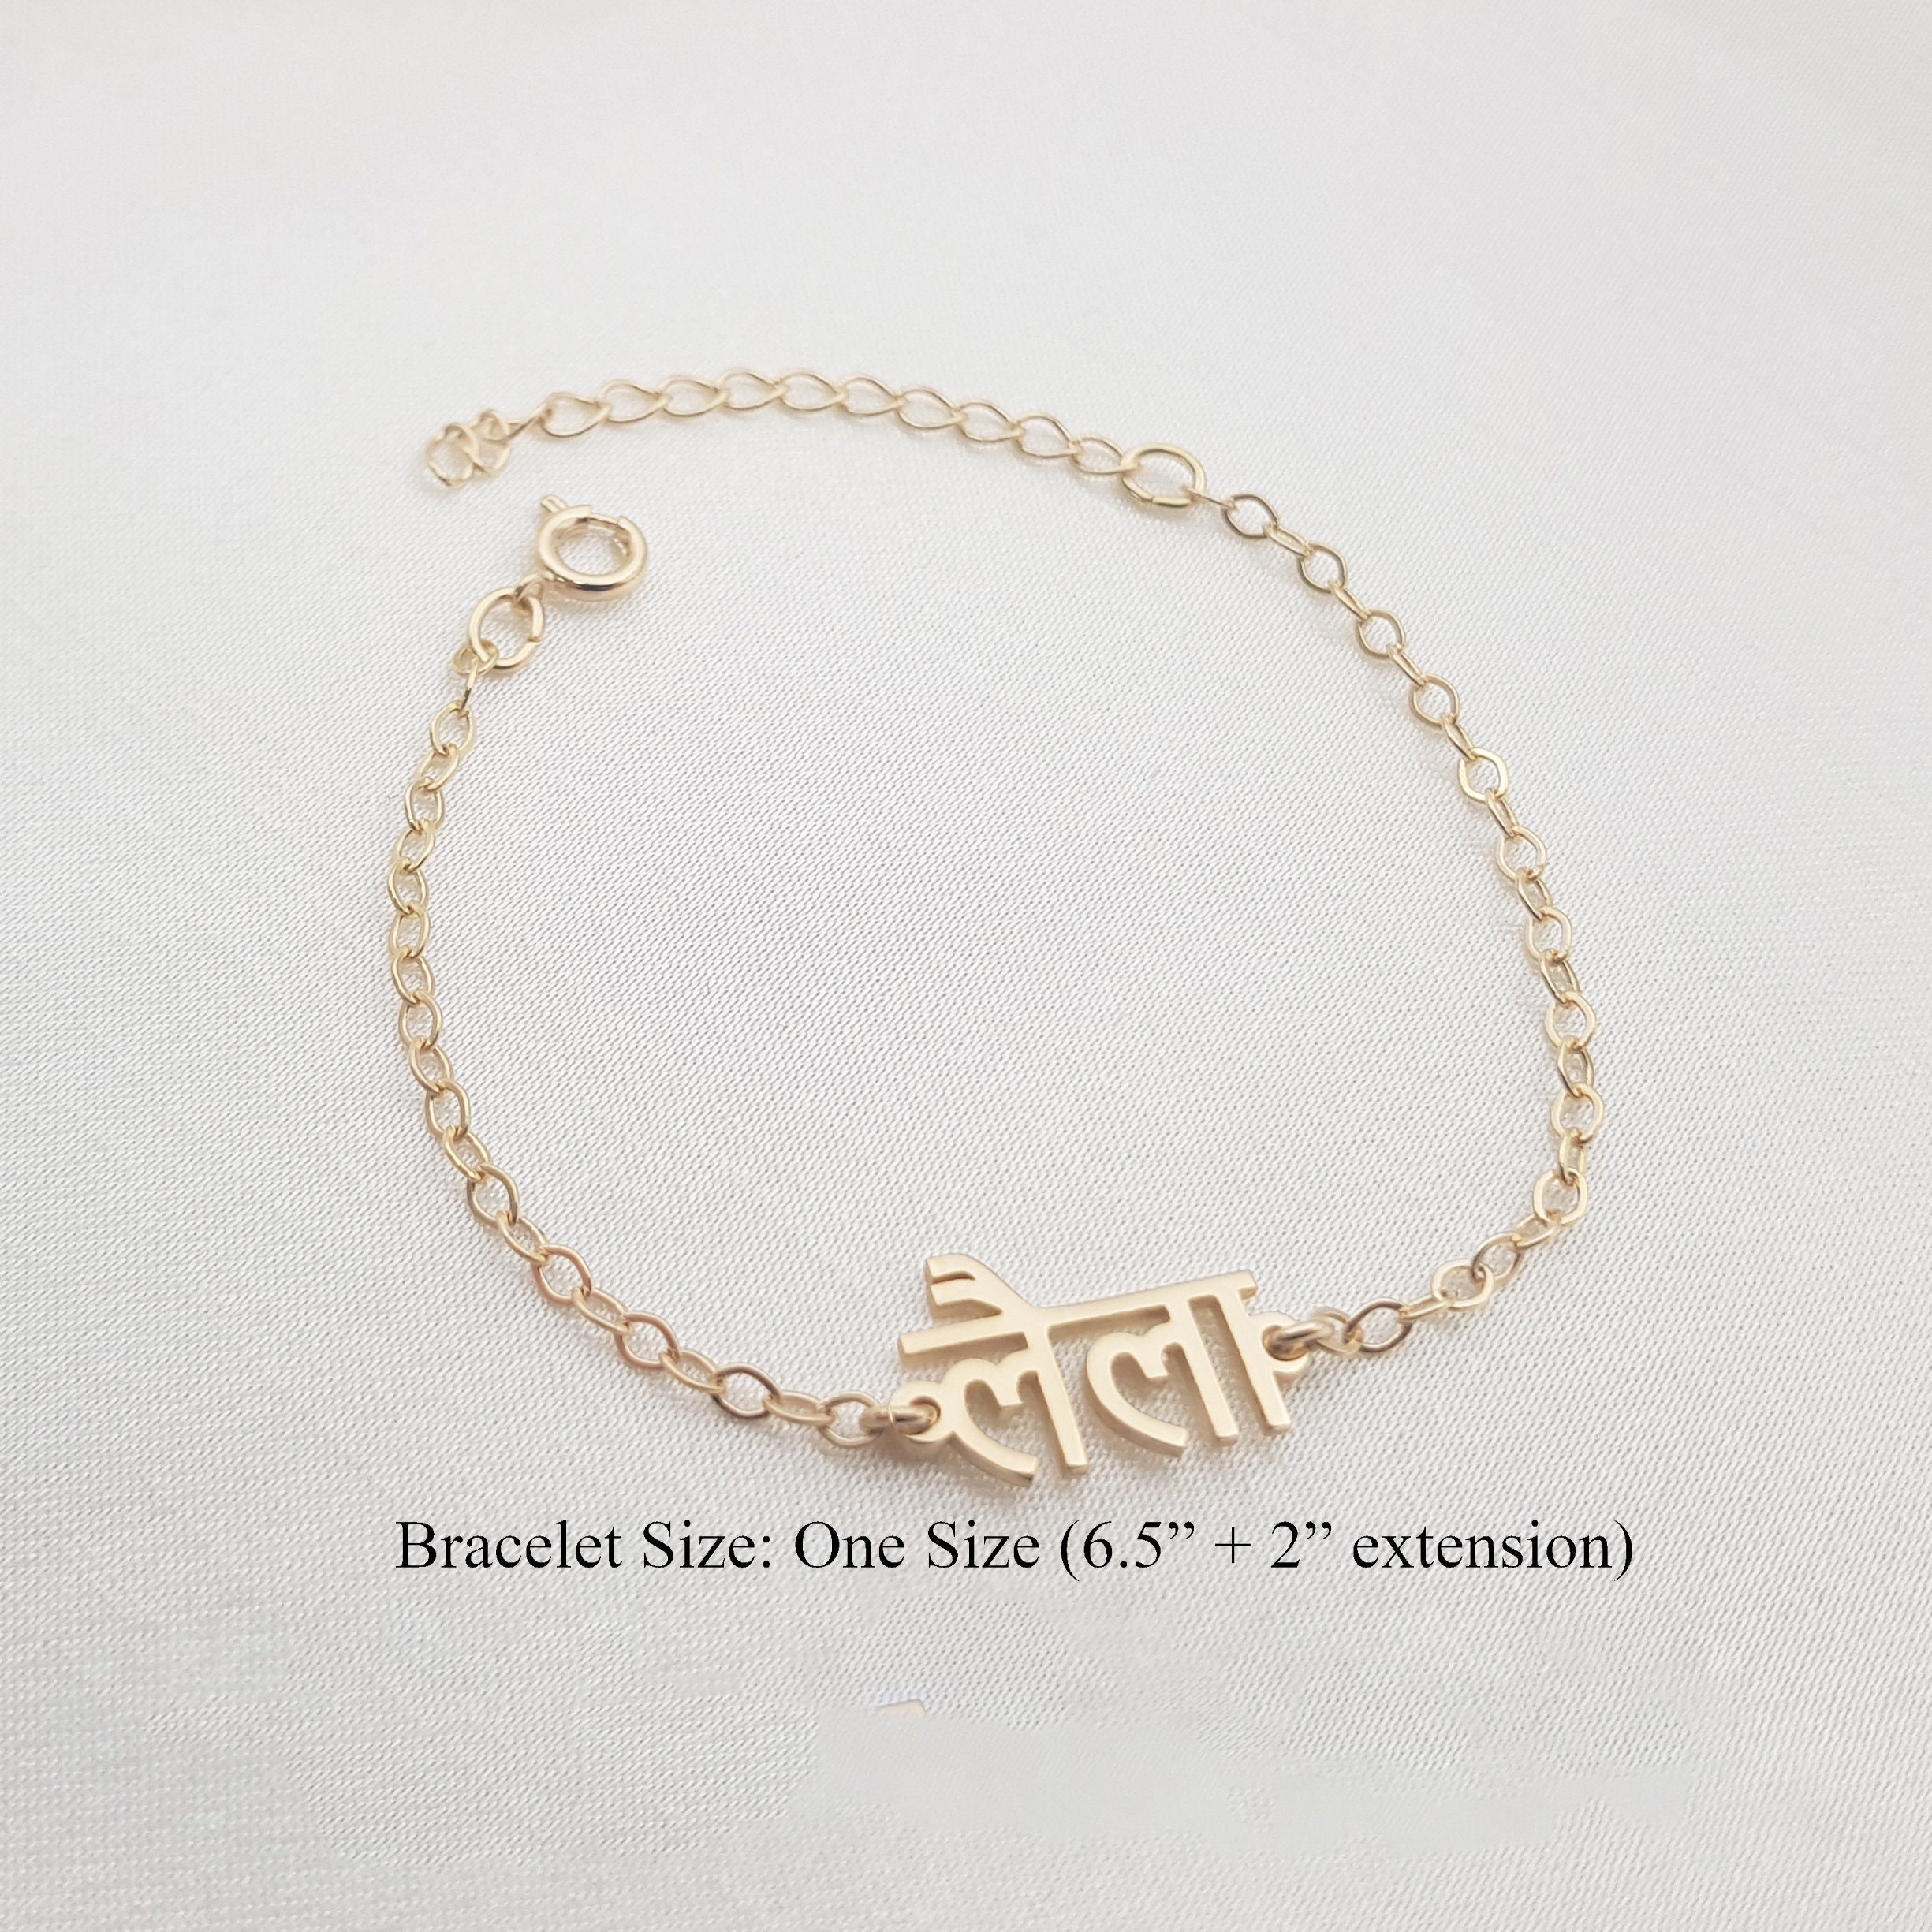 Boho Friendship Bracelet With Metal Stones And Drawstring Tassel In Hindi  Unisex From Wp5689, $5.03 | DHgate.Com